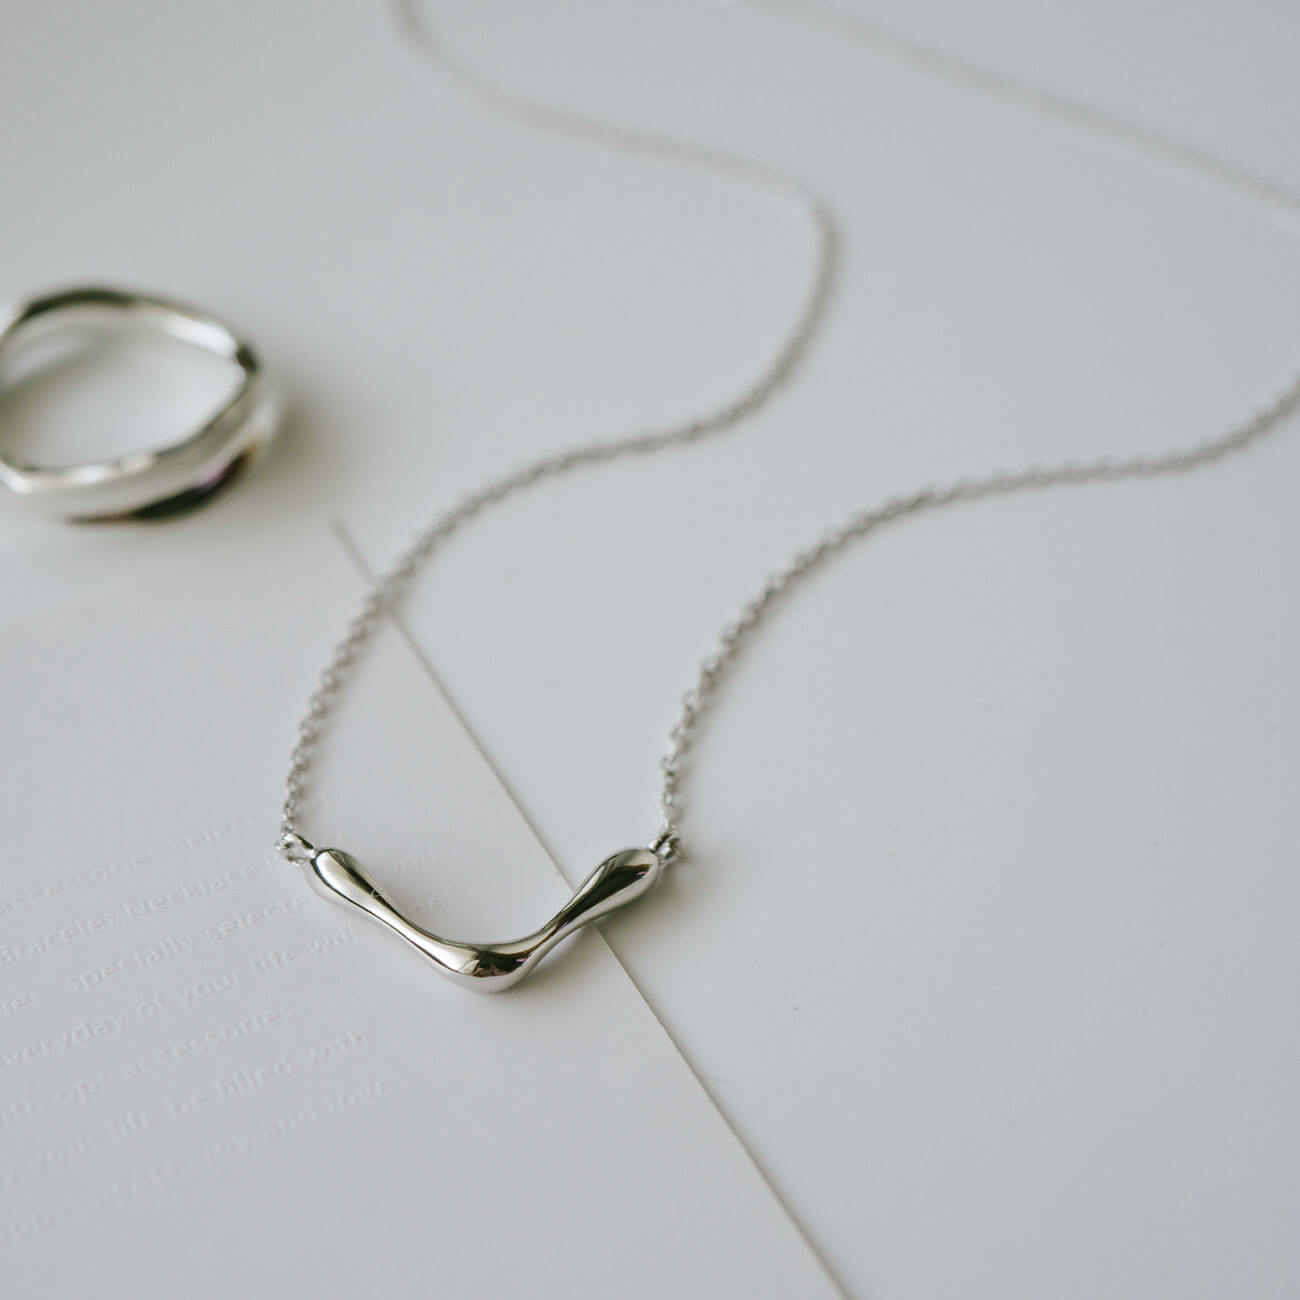 Silver925 Luster V Shaped Necklace | NERO-SILVER WEDGE NECKLACE